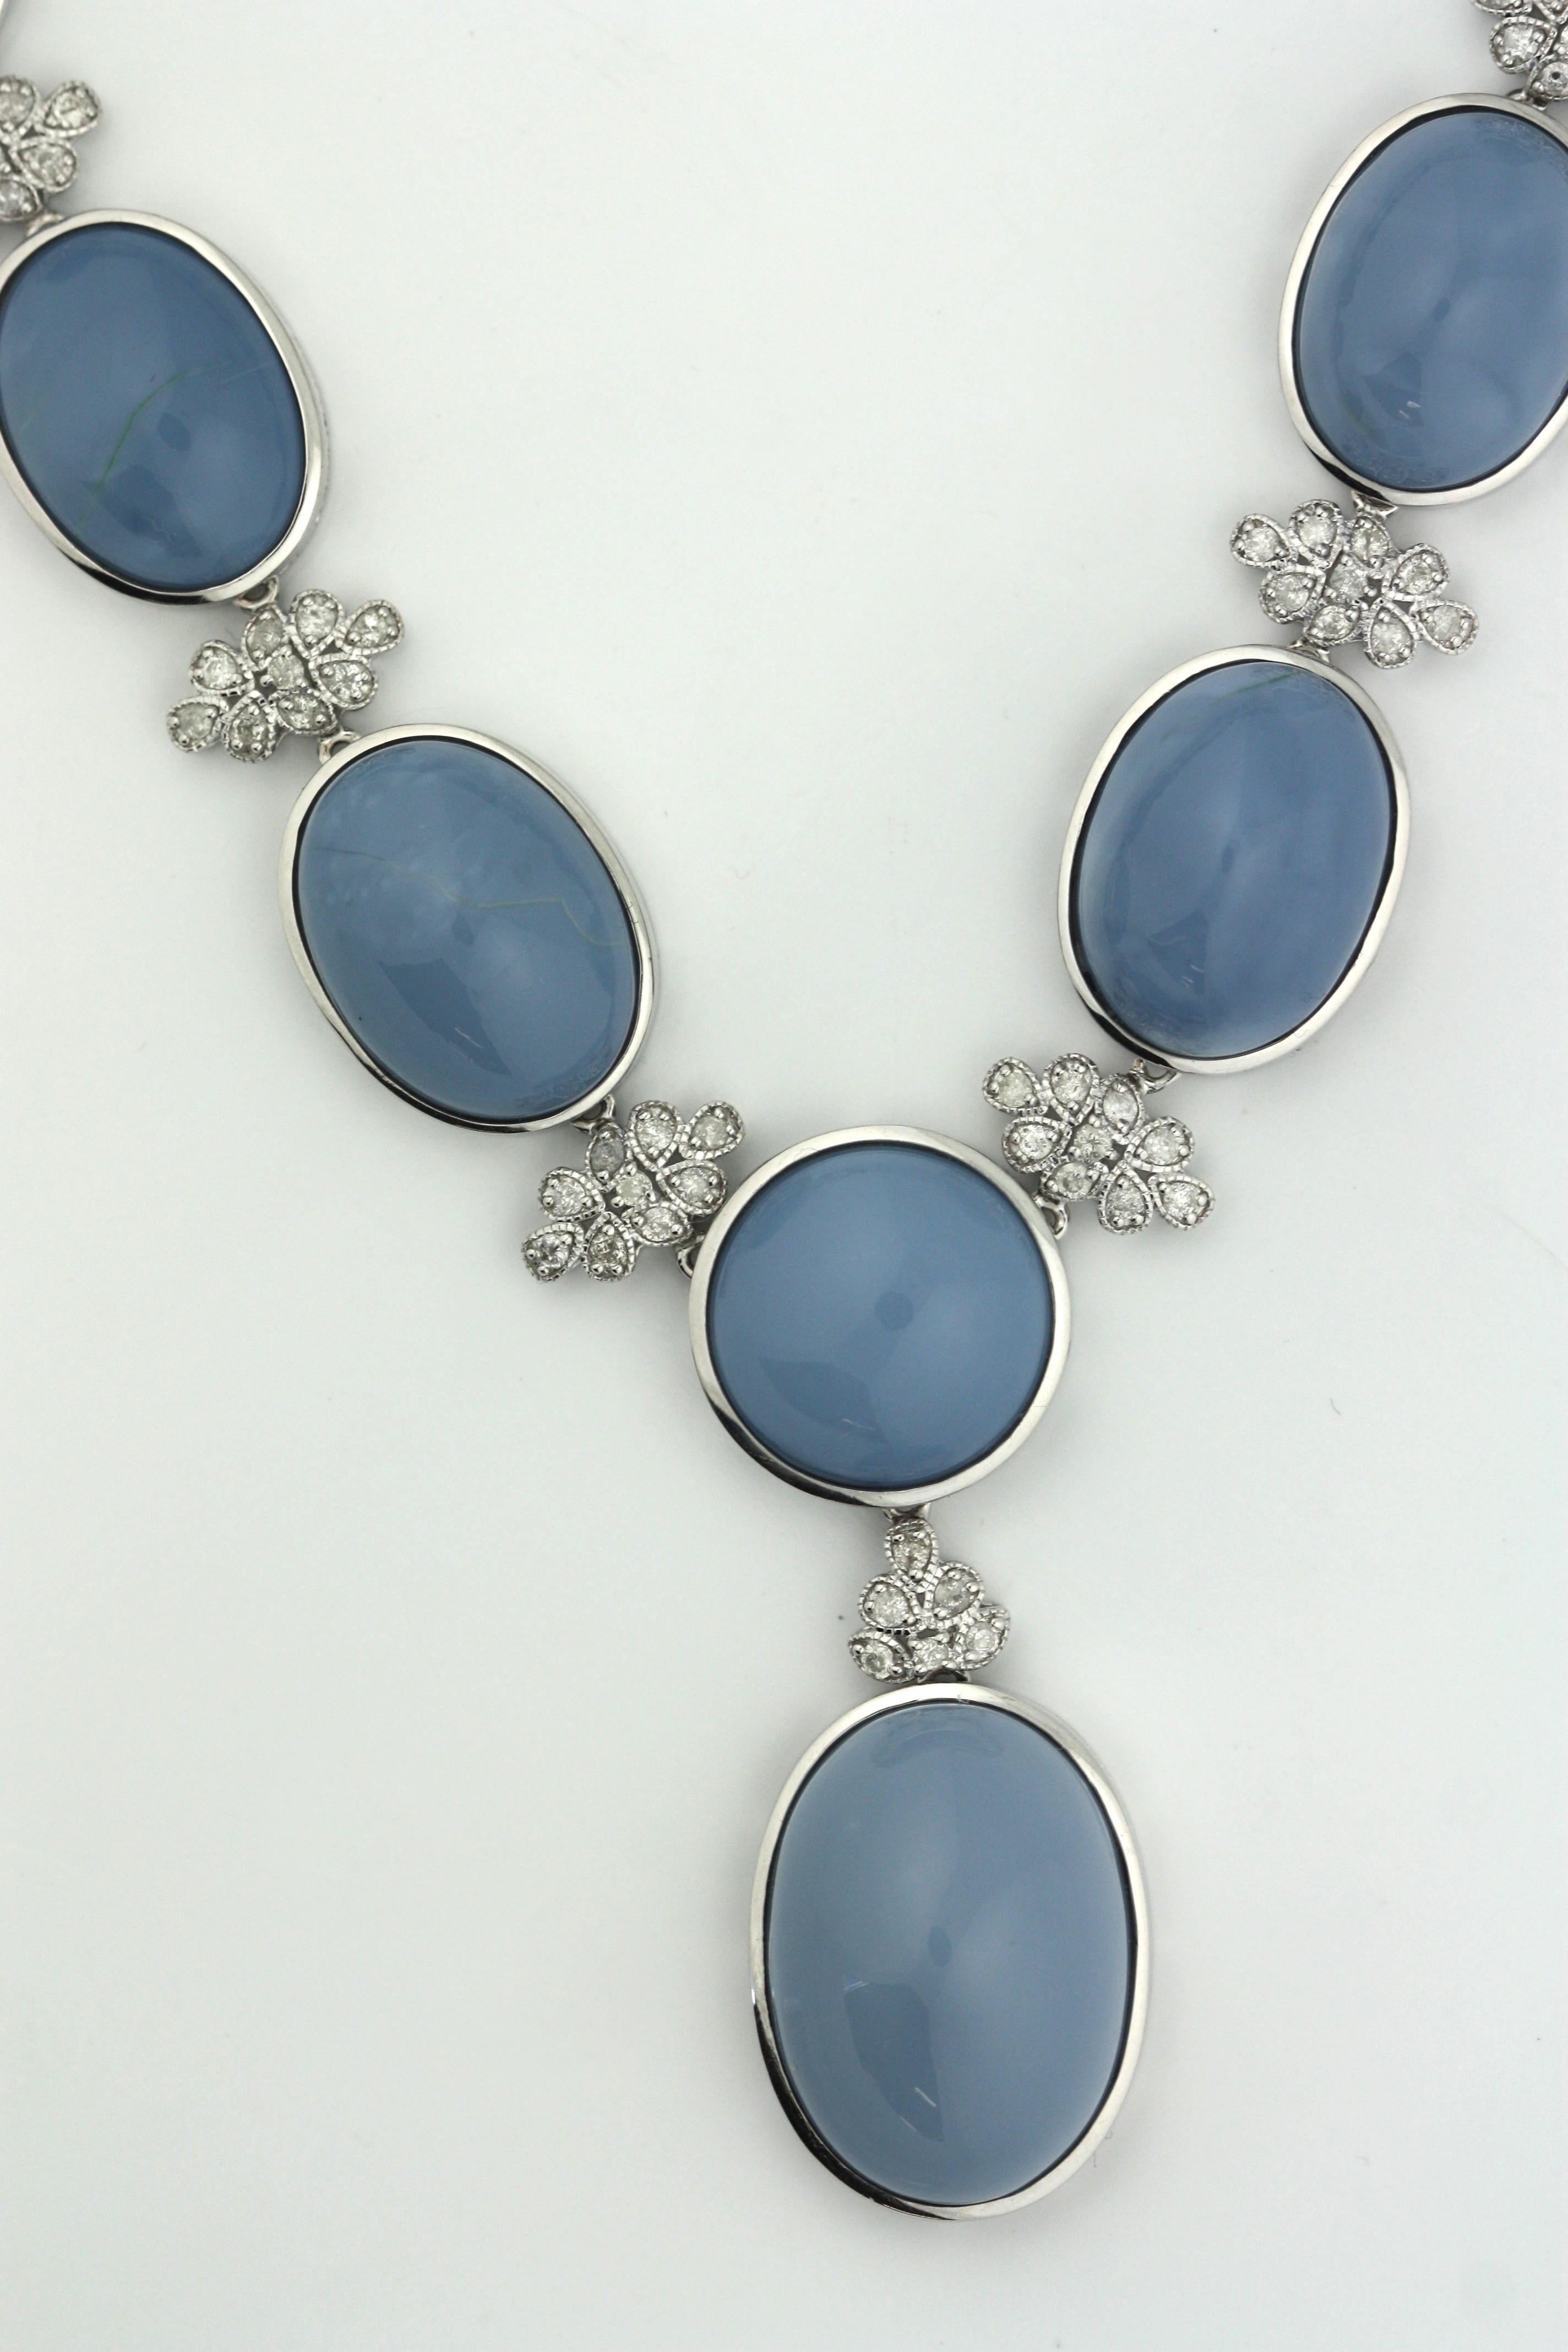 
14K Oscar Friedman Opal and Diamond Necklace 
Featuring one centered round Opal and seventeen oval cabochon-cut opals, weighing approximately 164.64 carats, accented by one-hundred seventy-four alternating diamond clusters, weighing approximately